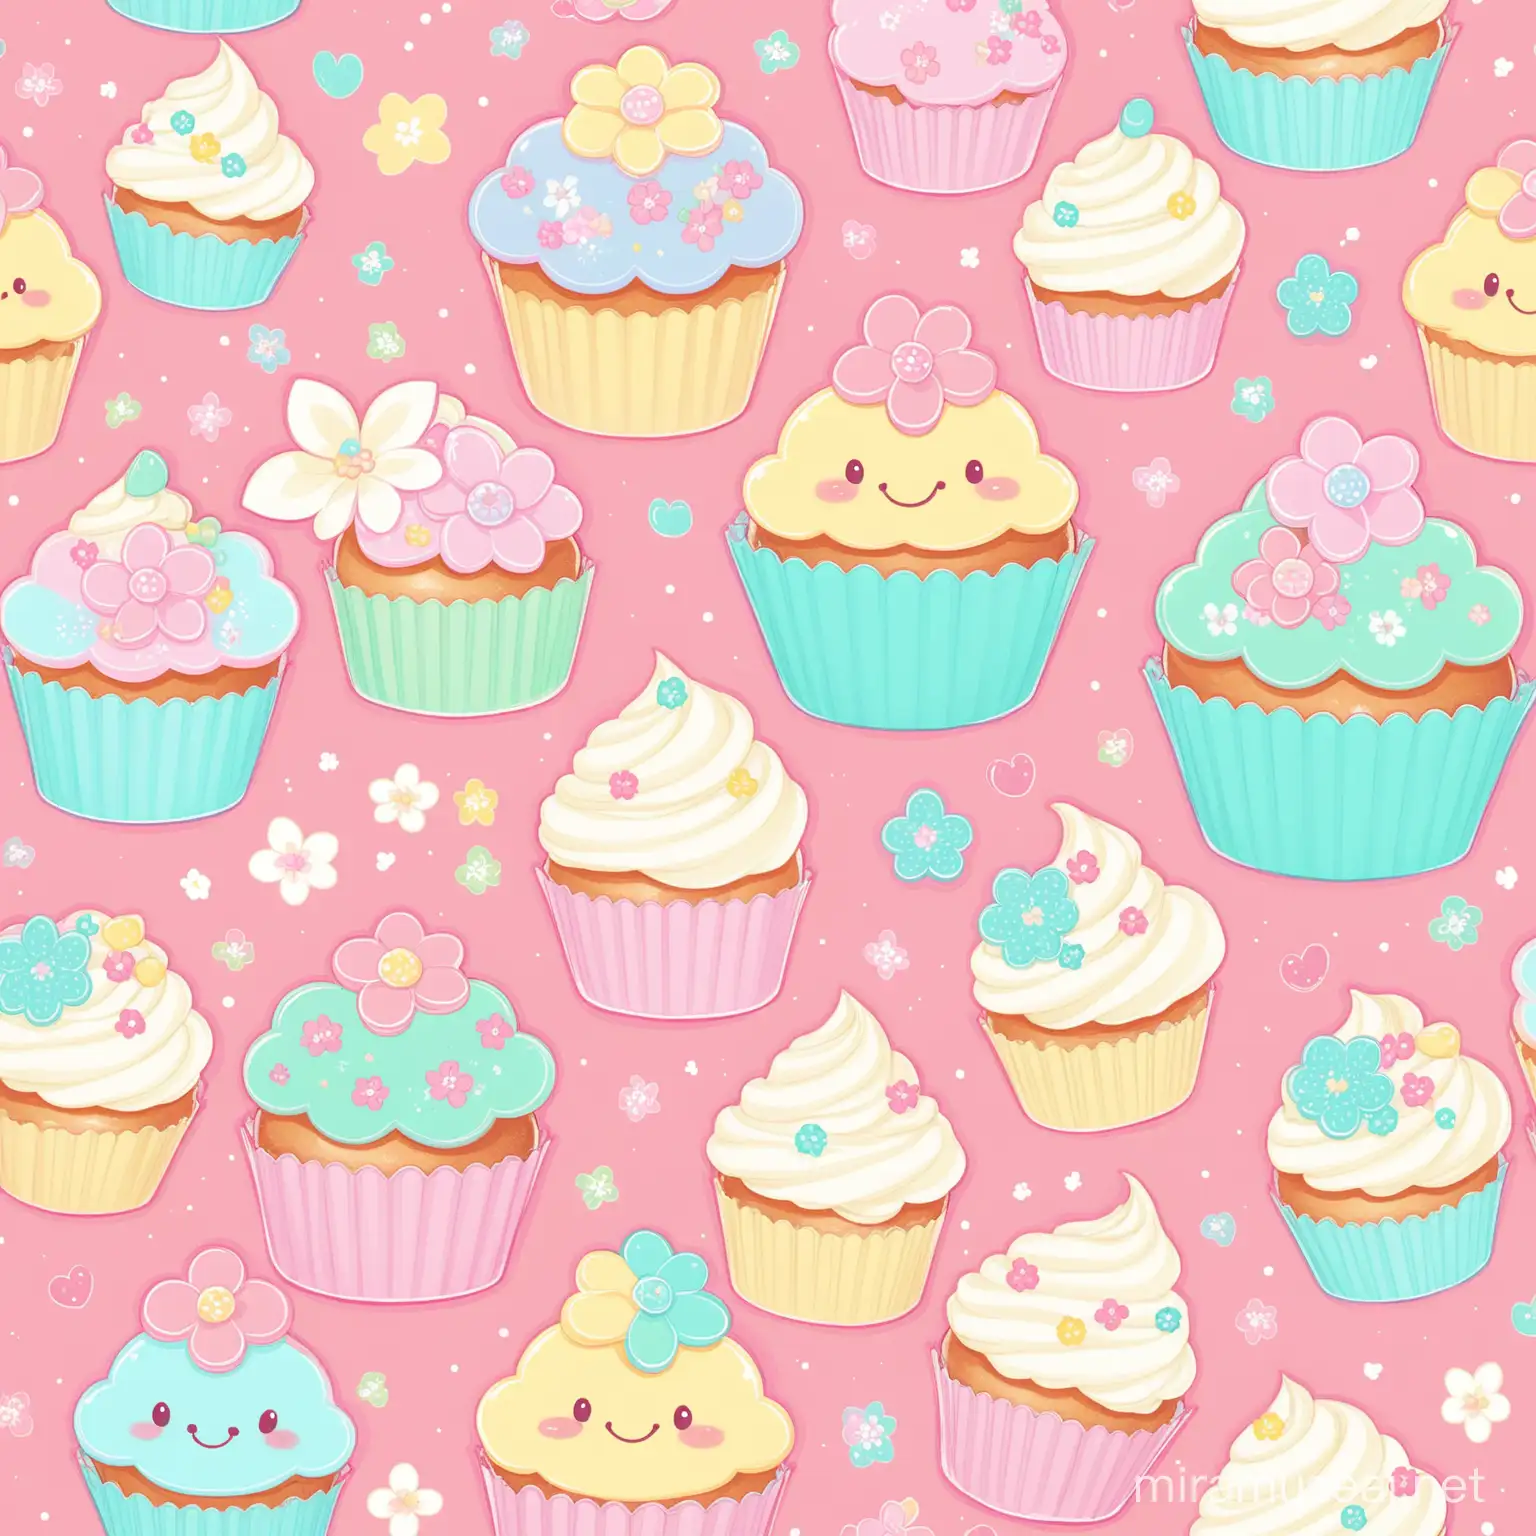 Whimsical Pastel Floral Cupcake with a Smile